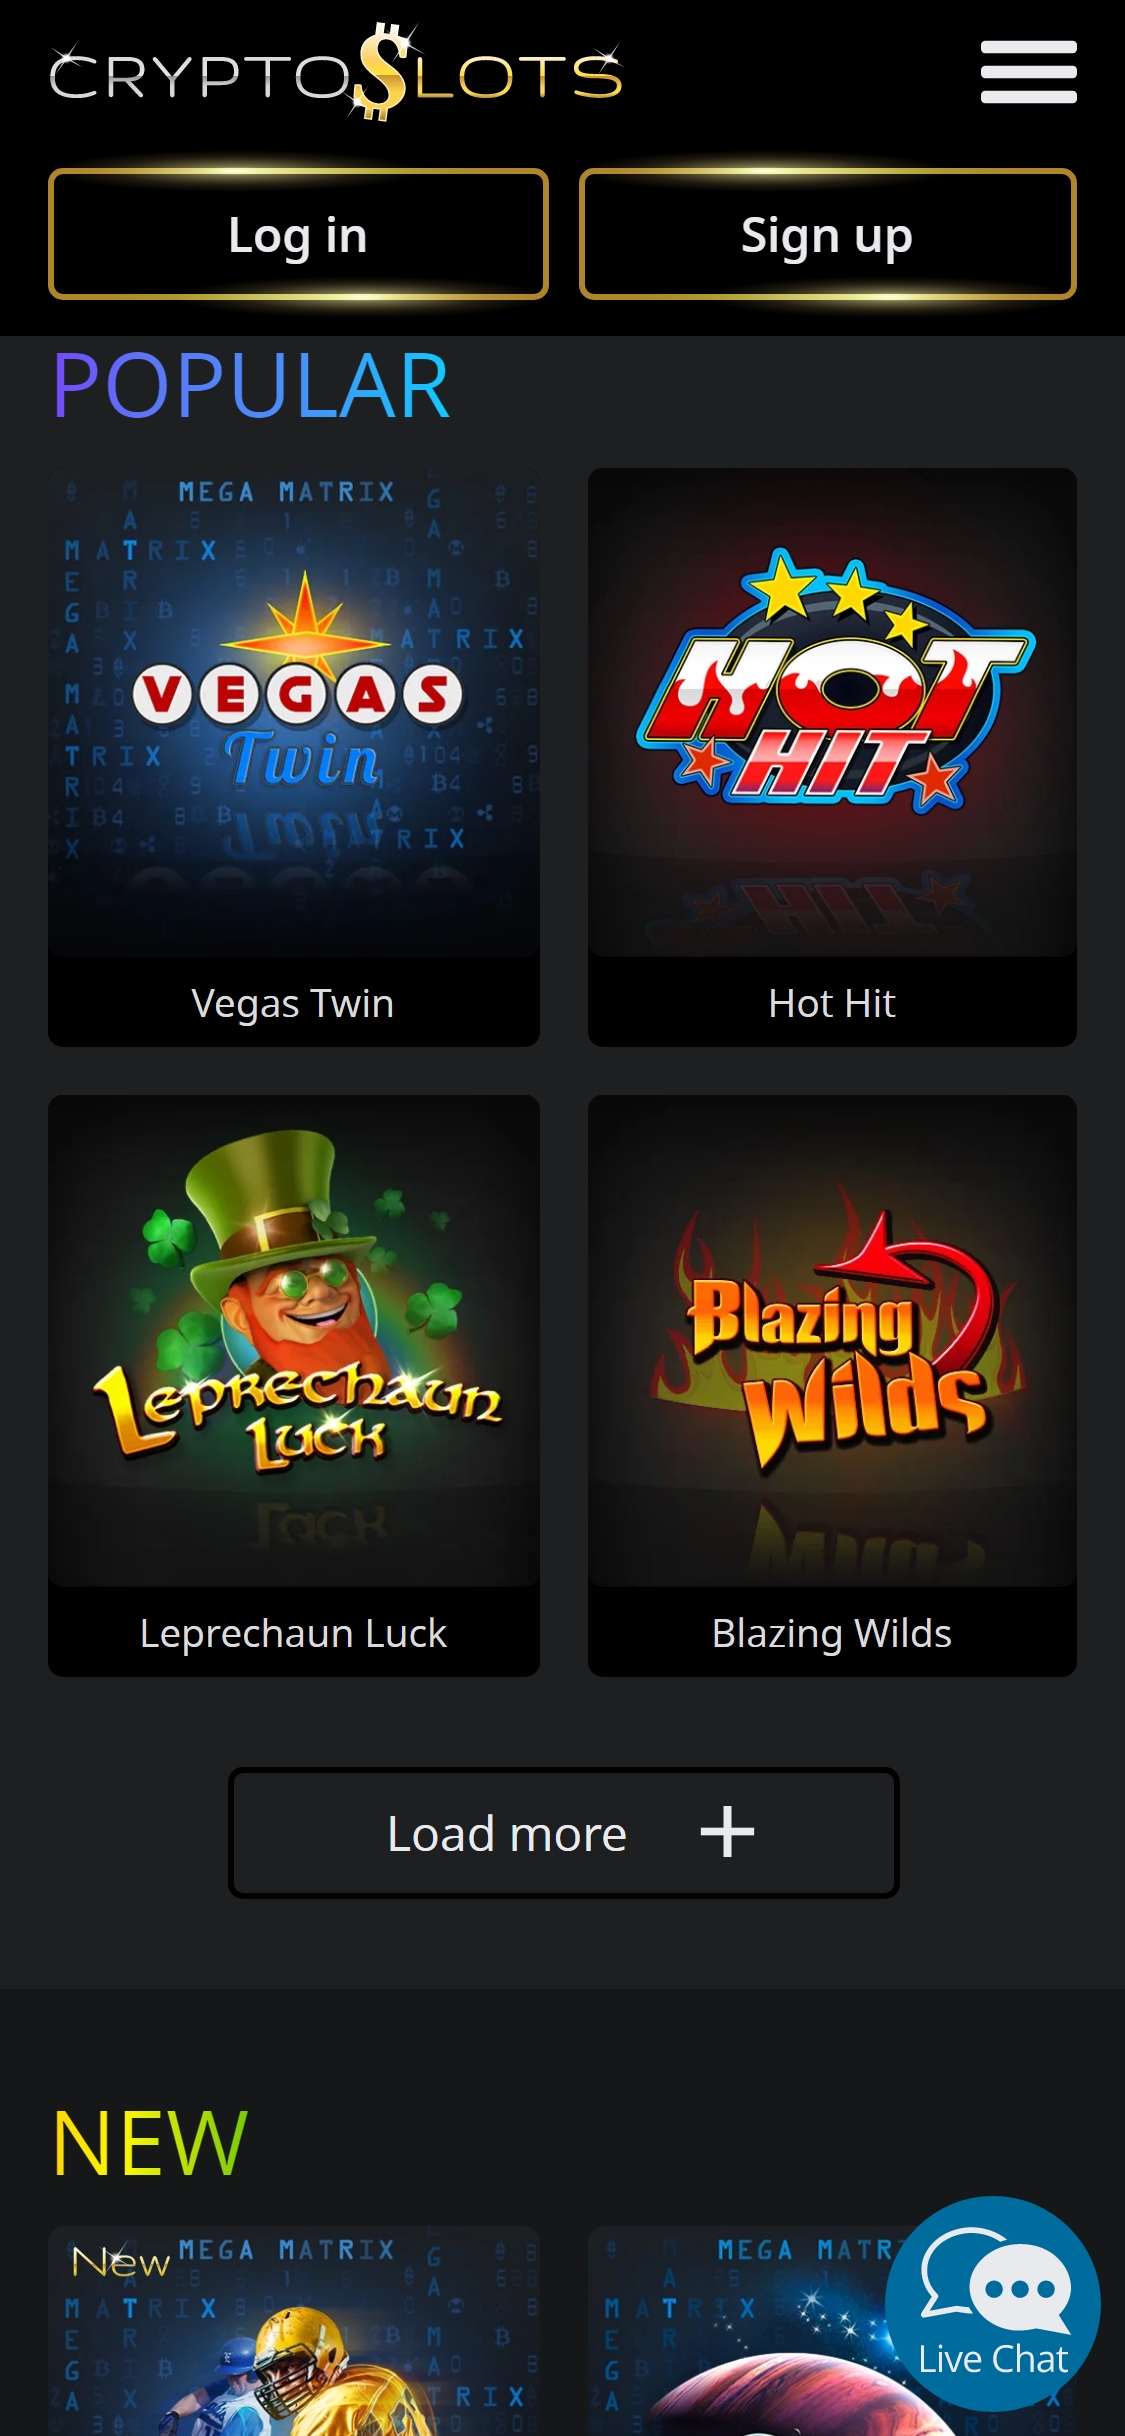 Crypto Slots Casino Mobile Games Review